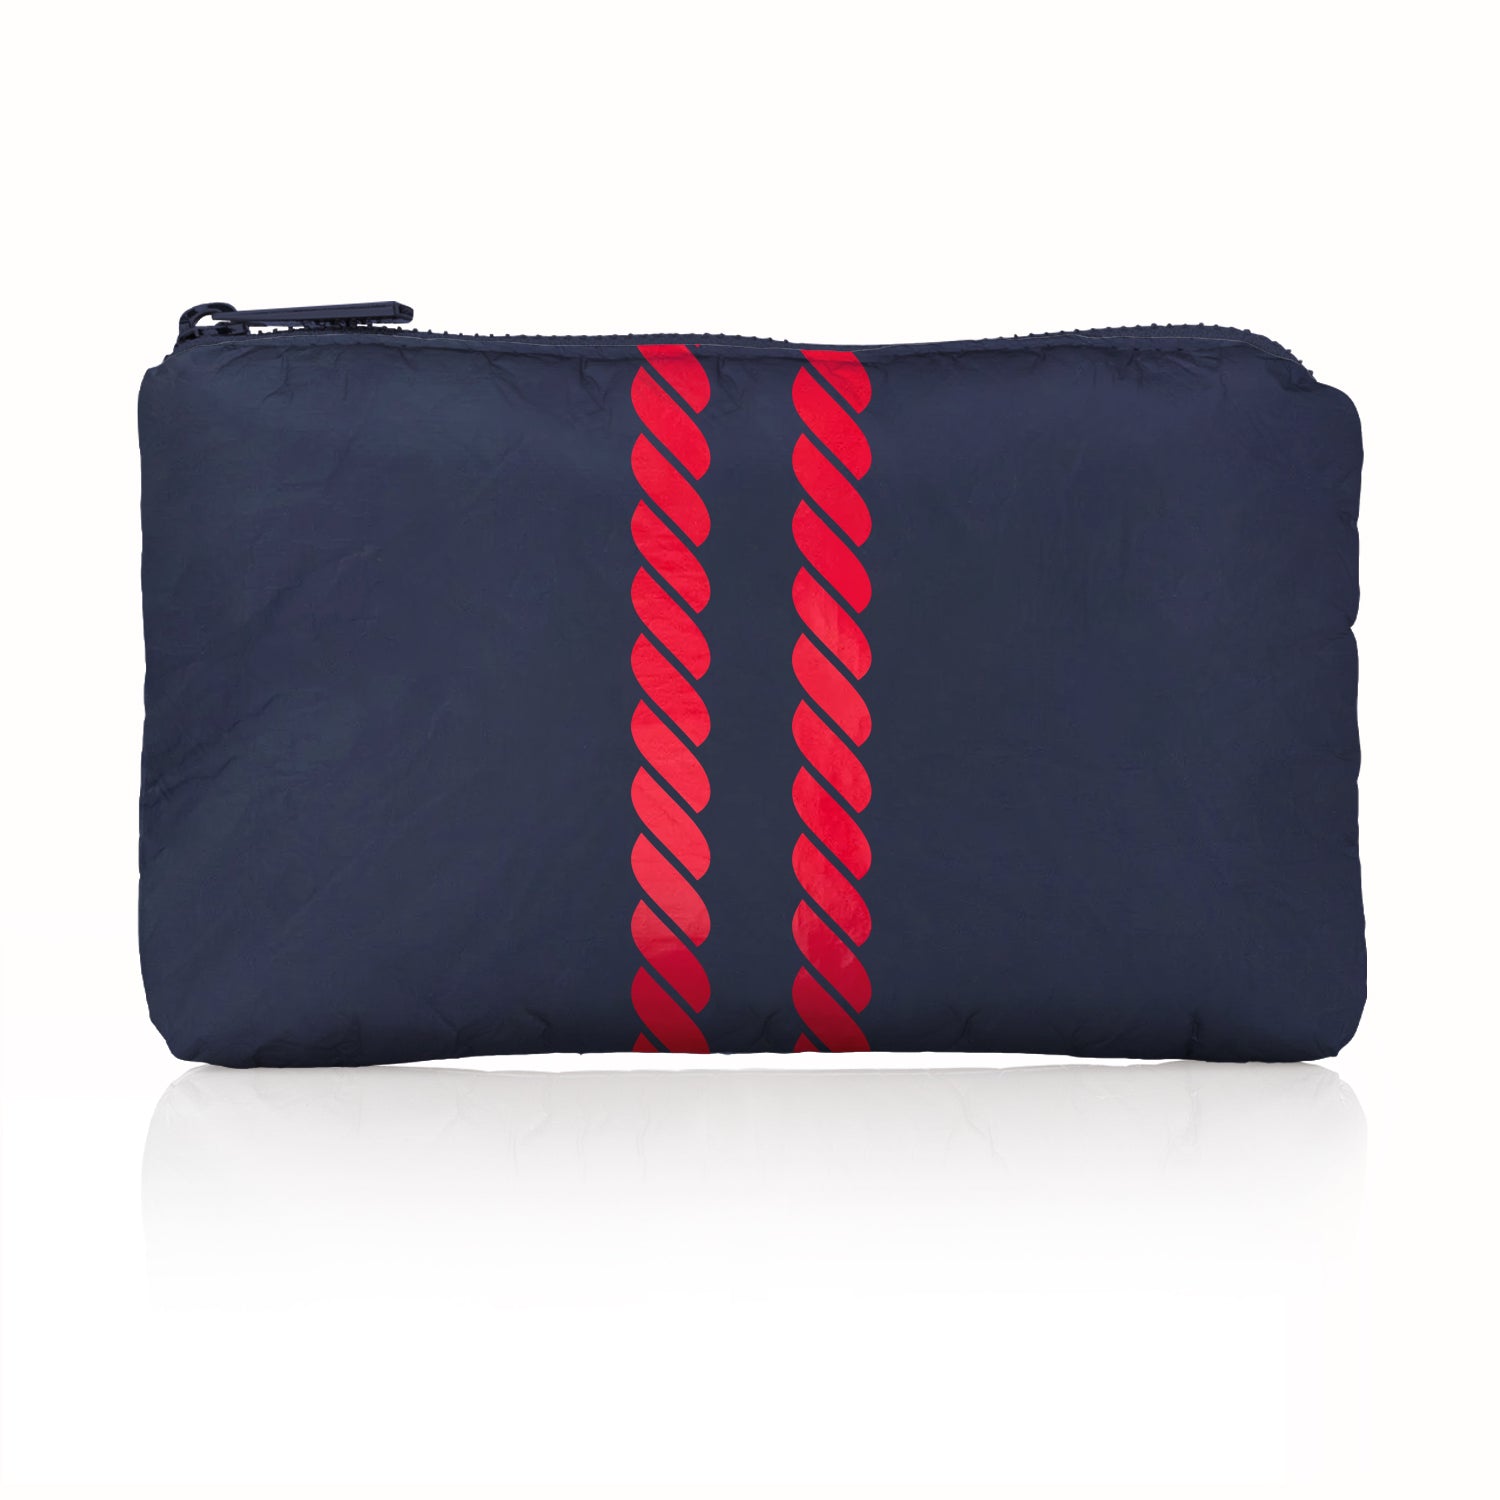 mini pack in navy blue with red rope stripes